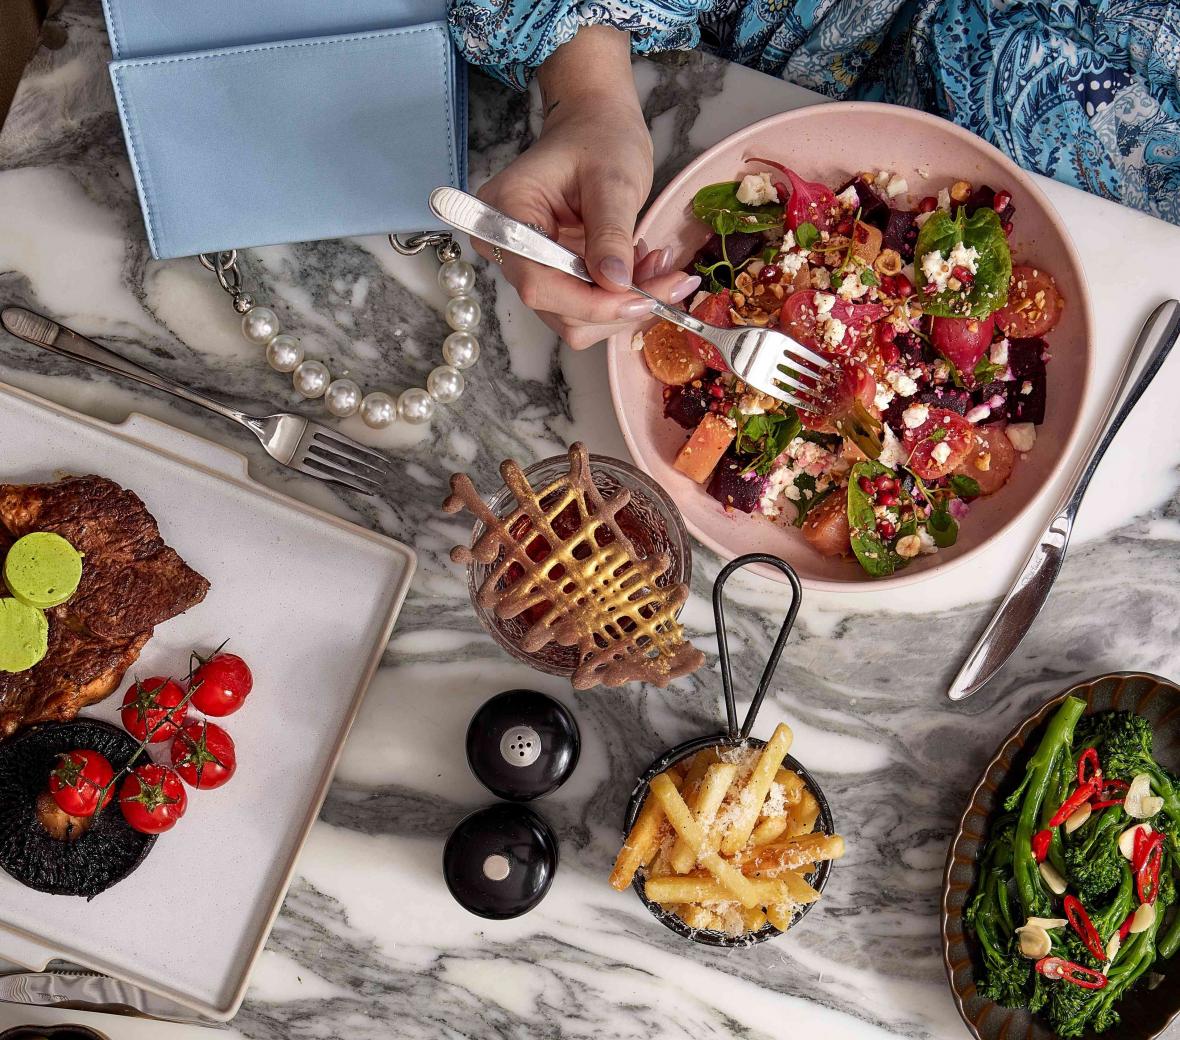 Salad in a pink bowl, blue purse, steak, fries, greens, martinis on a marble table